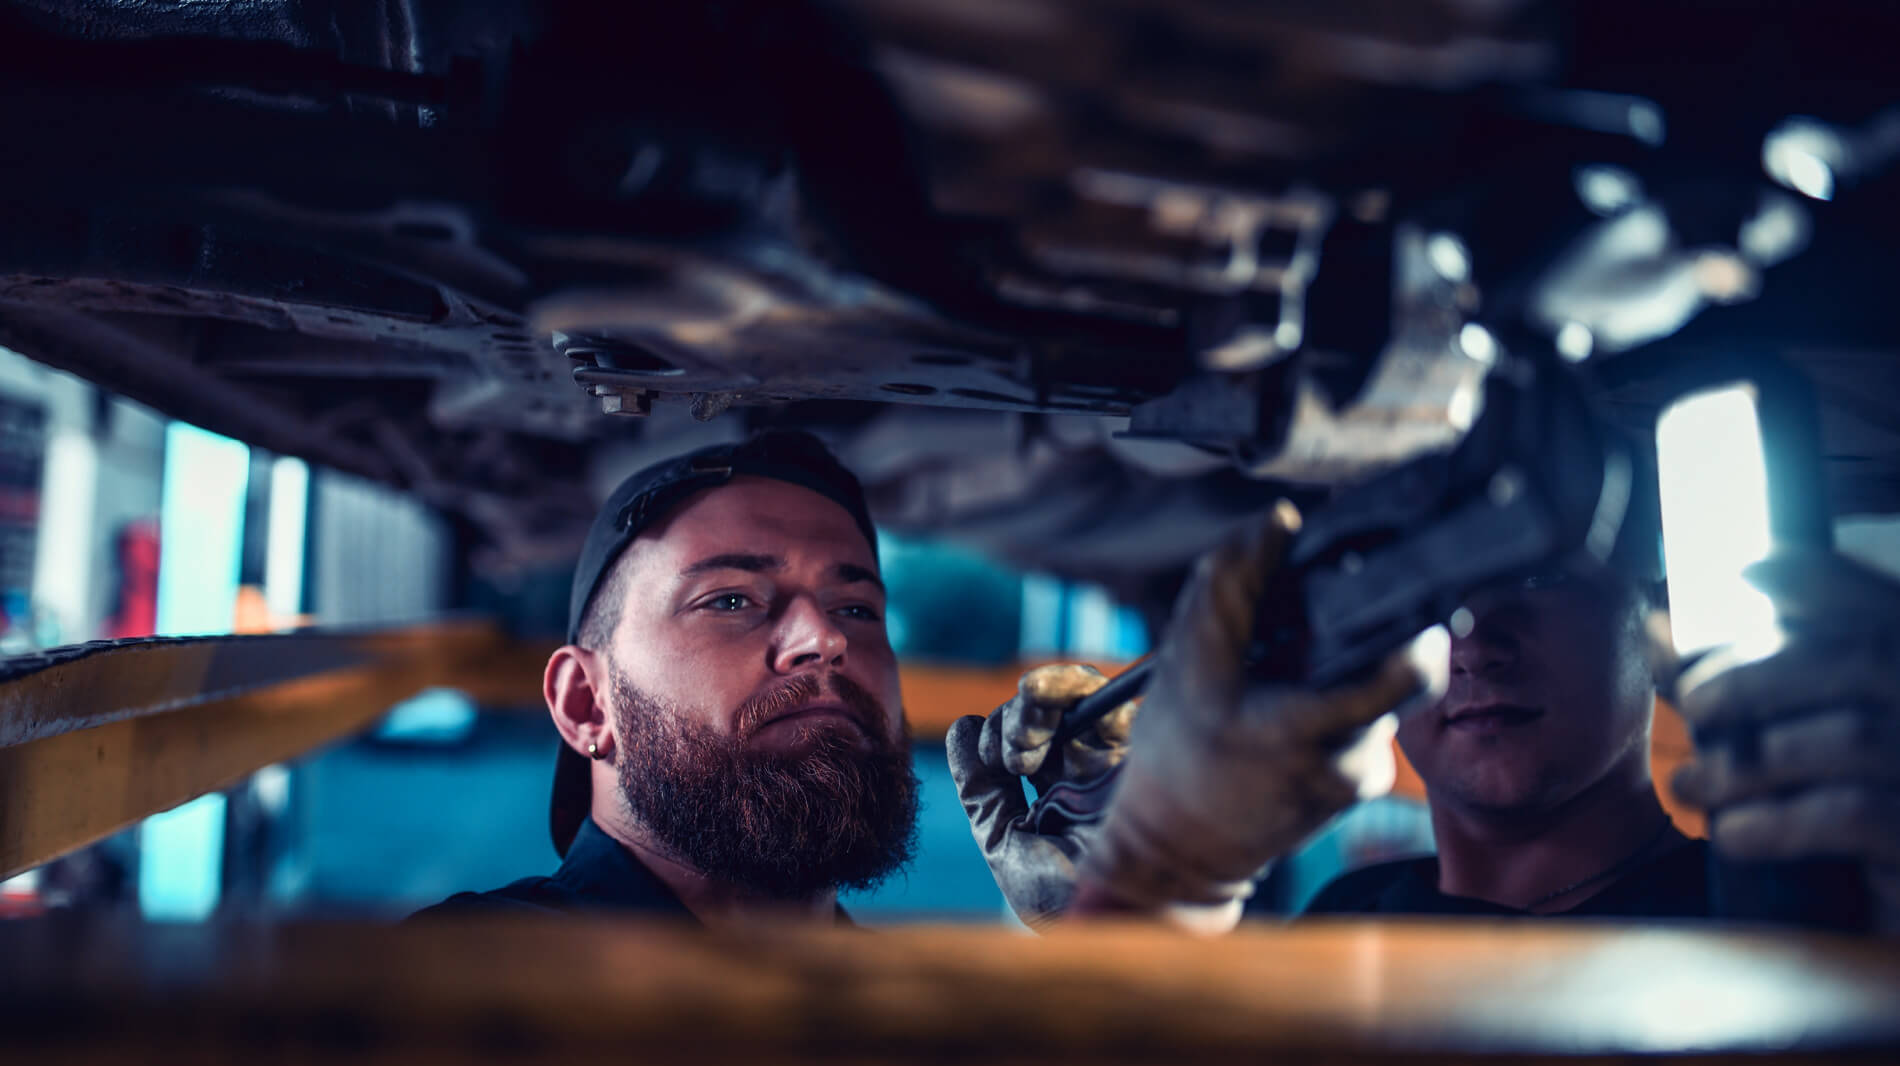 Midland Tune and Service offers reliable, trustworthy car servicing to Midland locals.